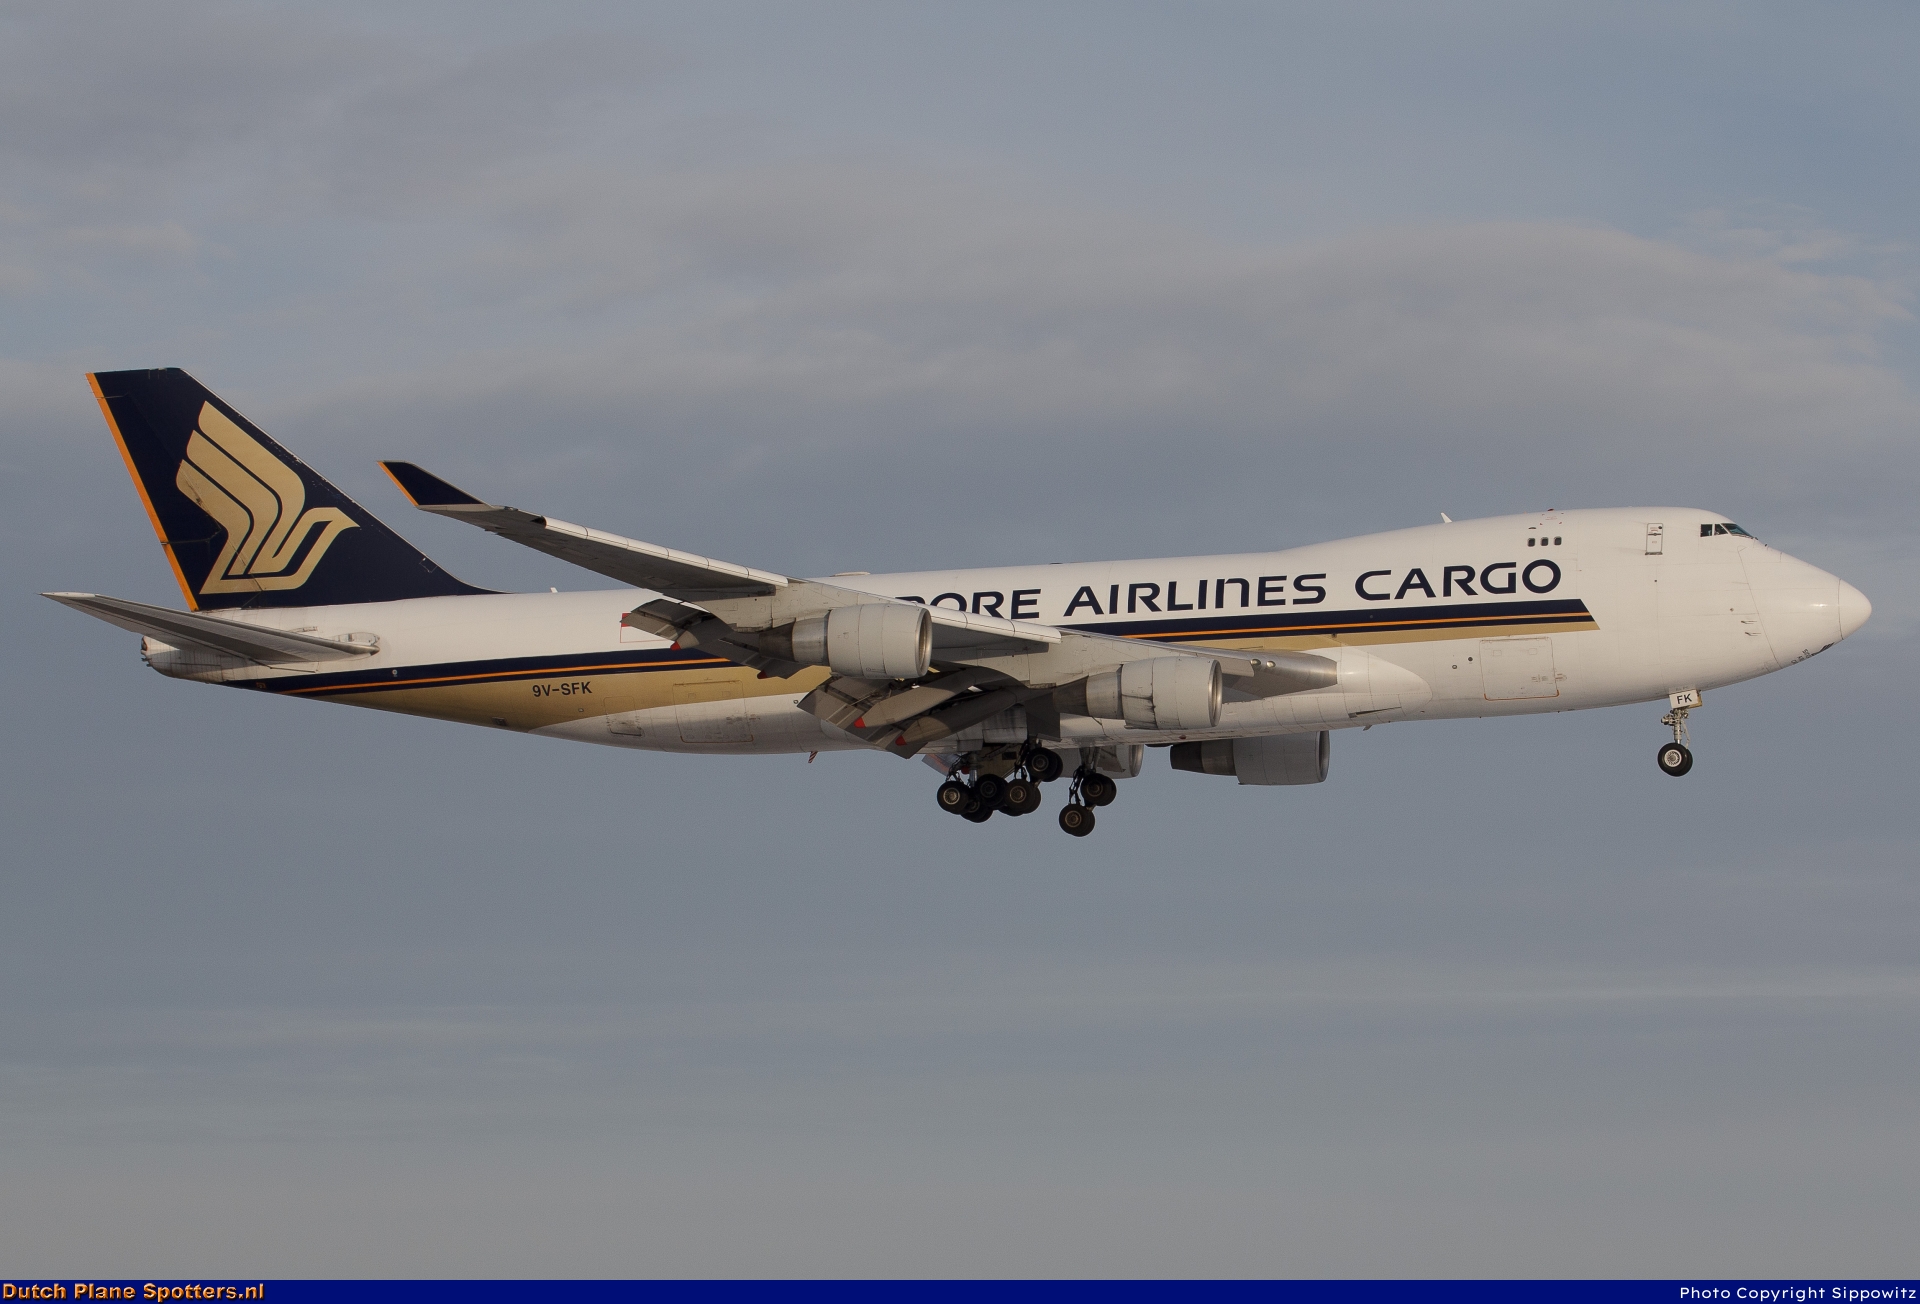 9V-SFK Boeing 747-400 Singapore Airlines Cargo by Sippowitz